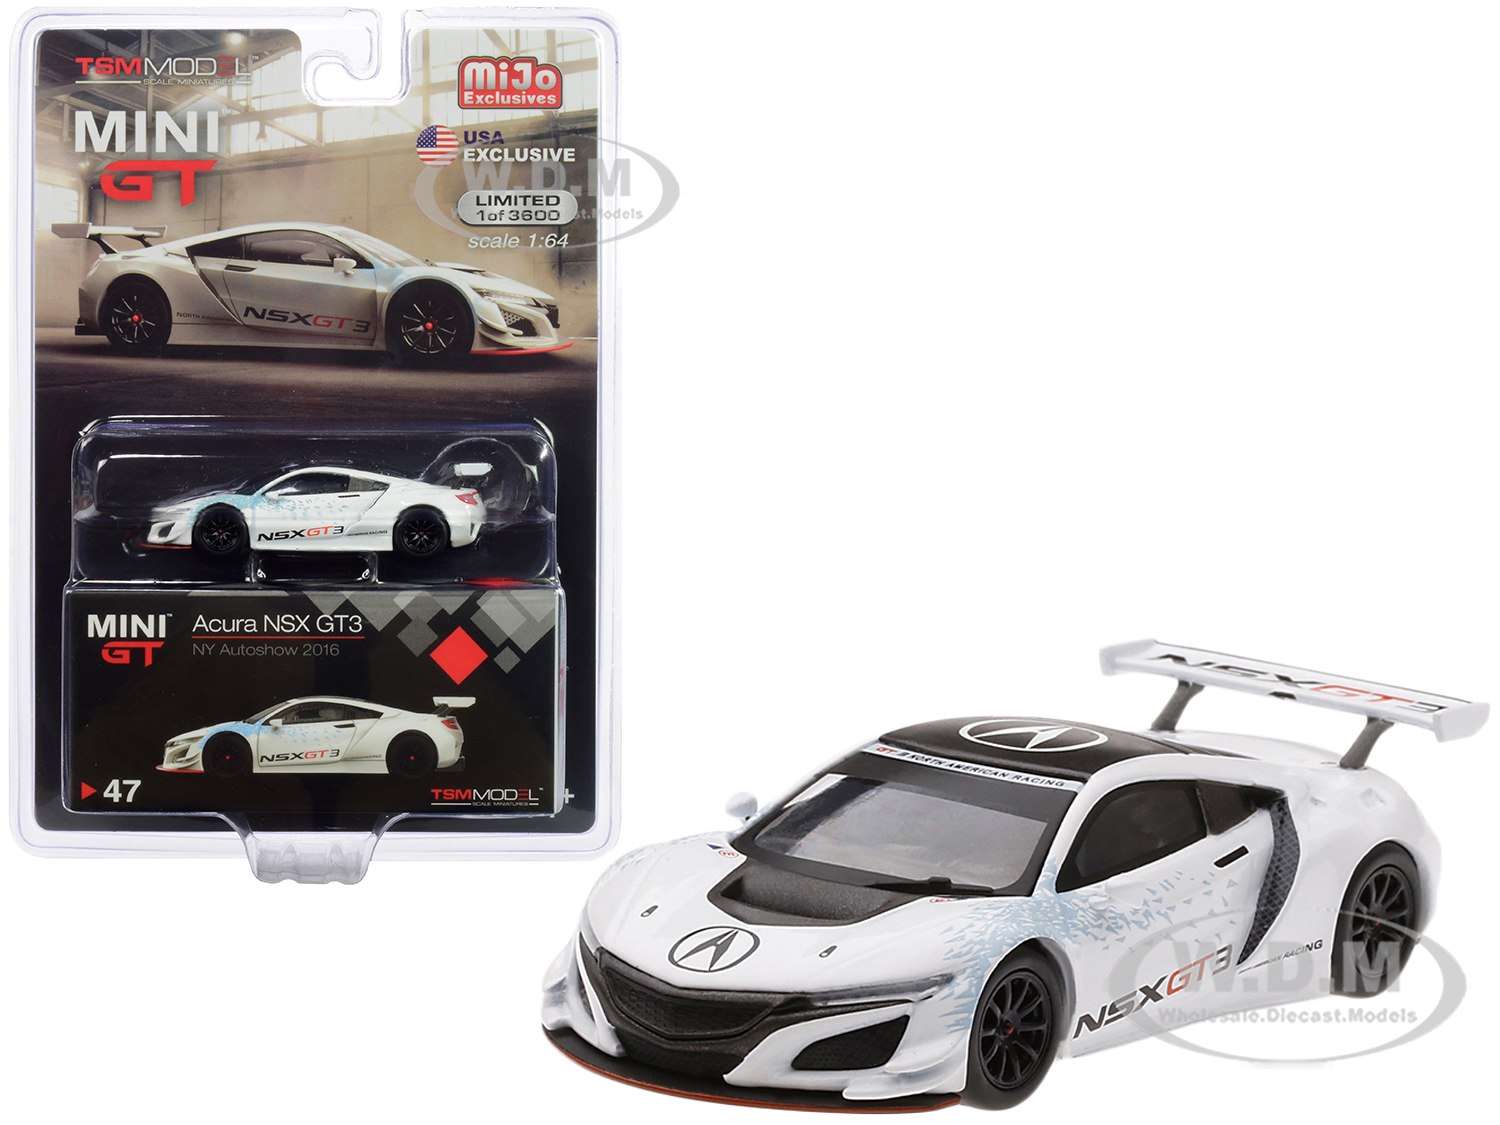 Acura NSX GT3 White "New York Auto Show 2016" Limited Edition to 3600 pieces Worldwide 1/64 Diecast Model Car by True Scale Miniatures